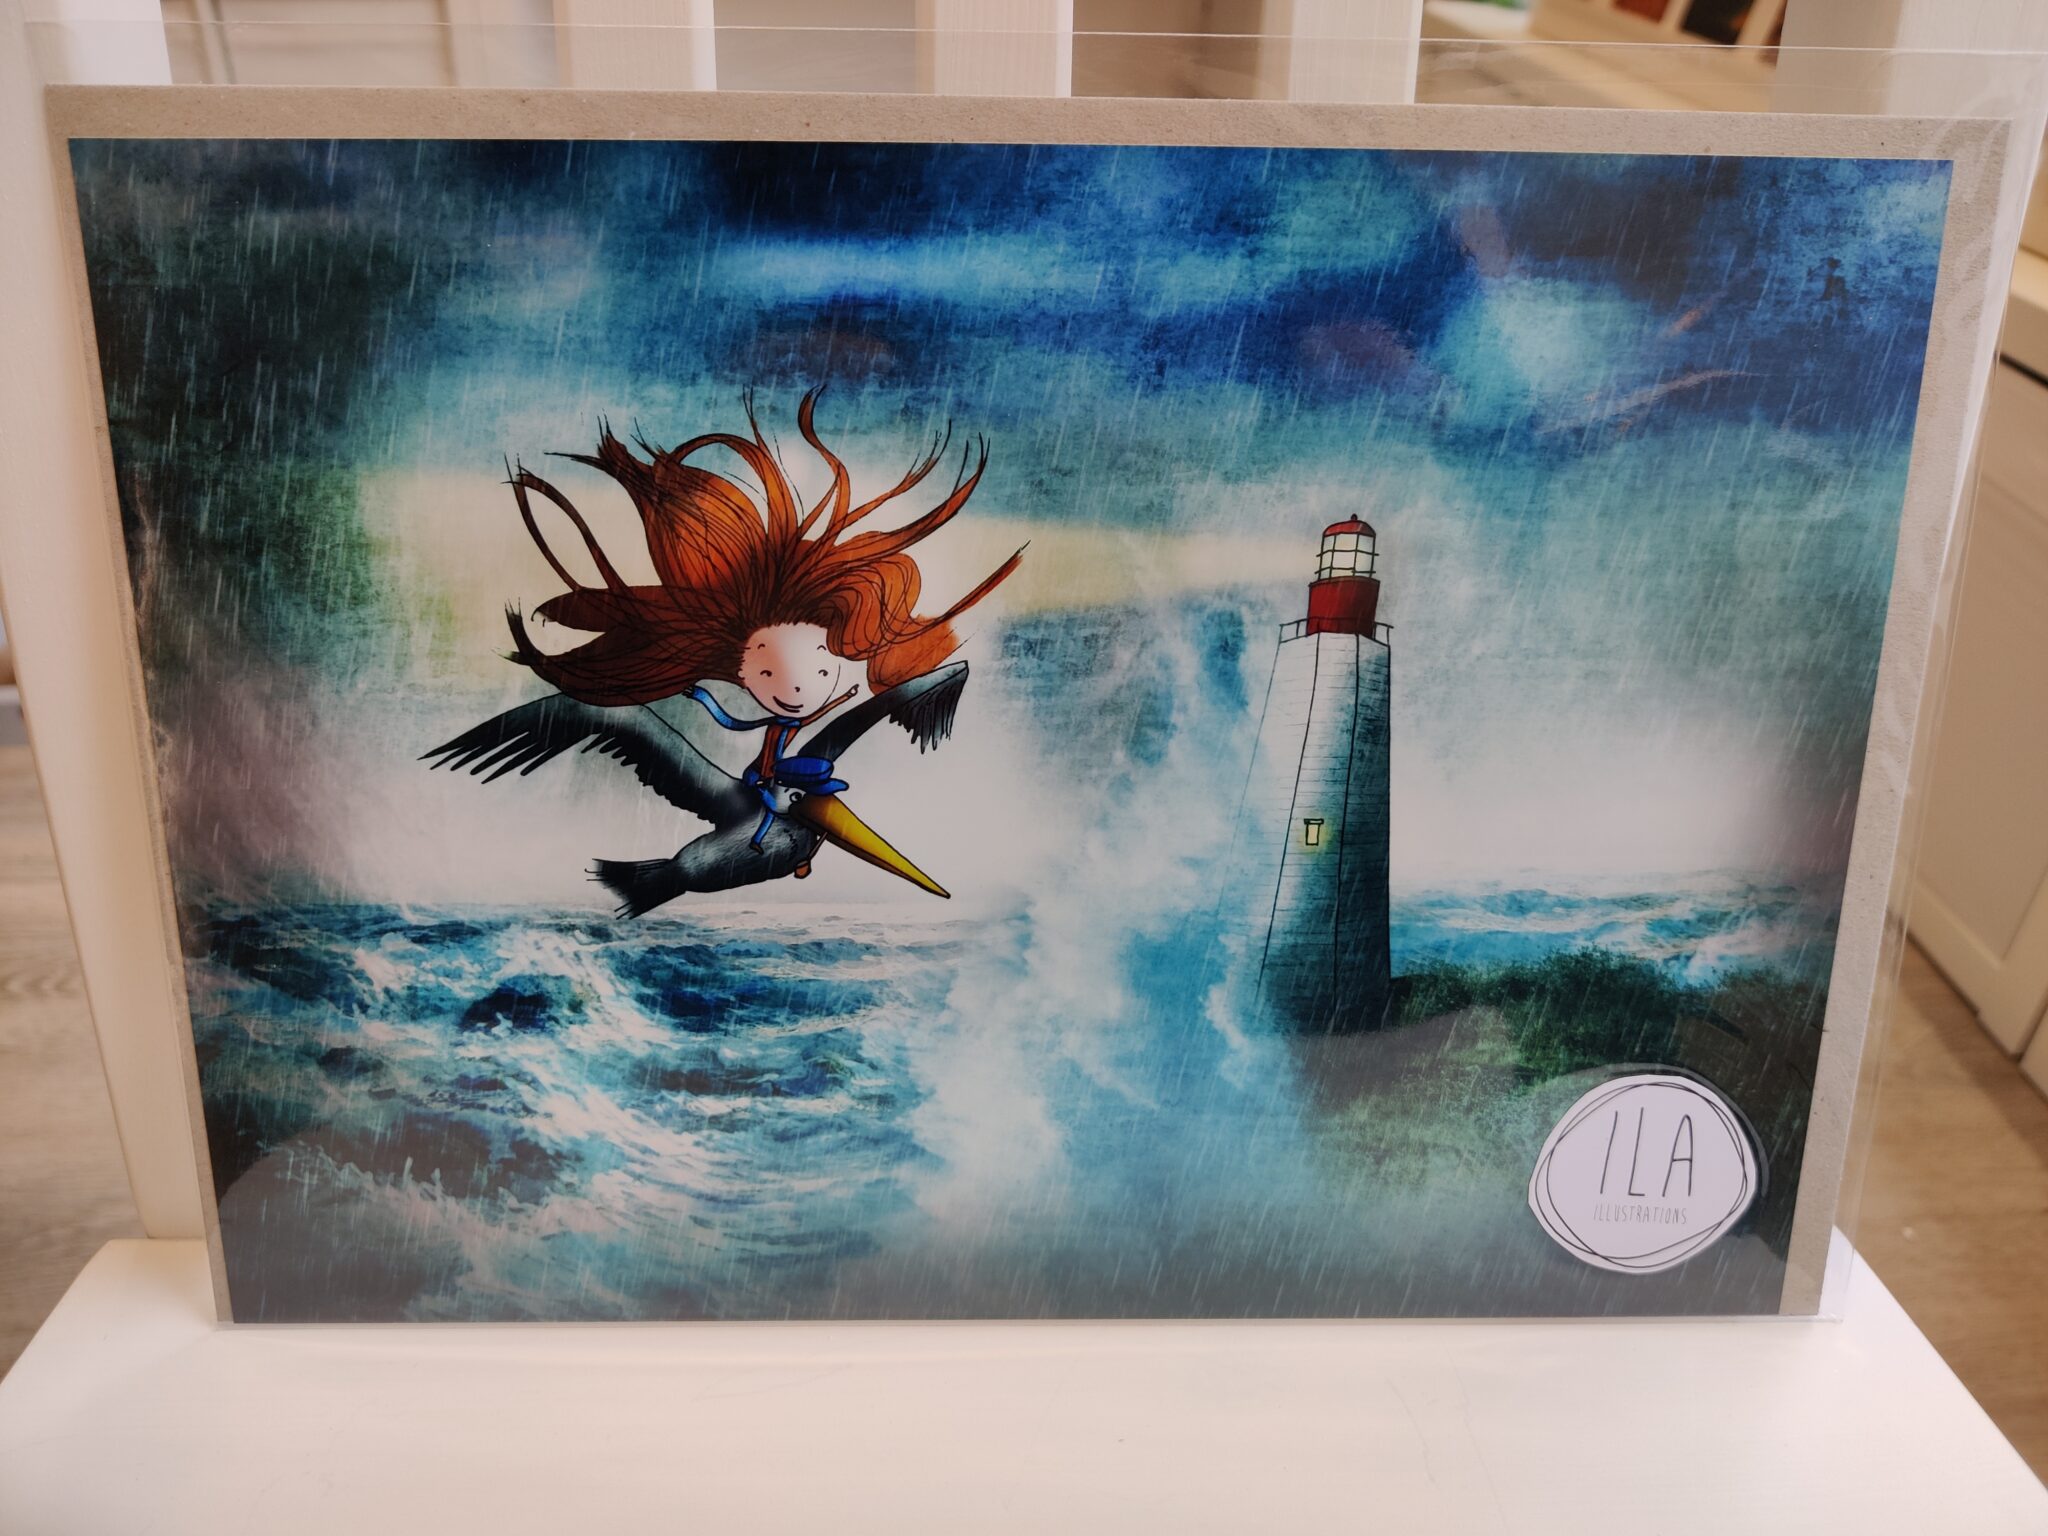 Poster Ila Illustrations "The lighthouse" A4